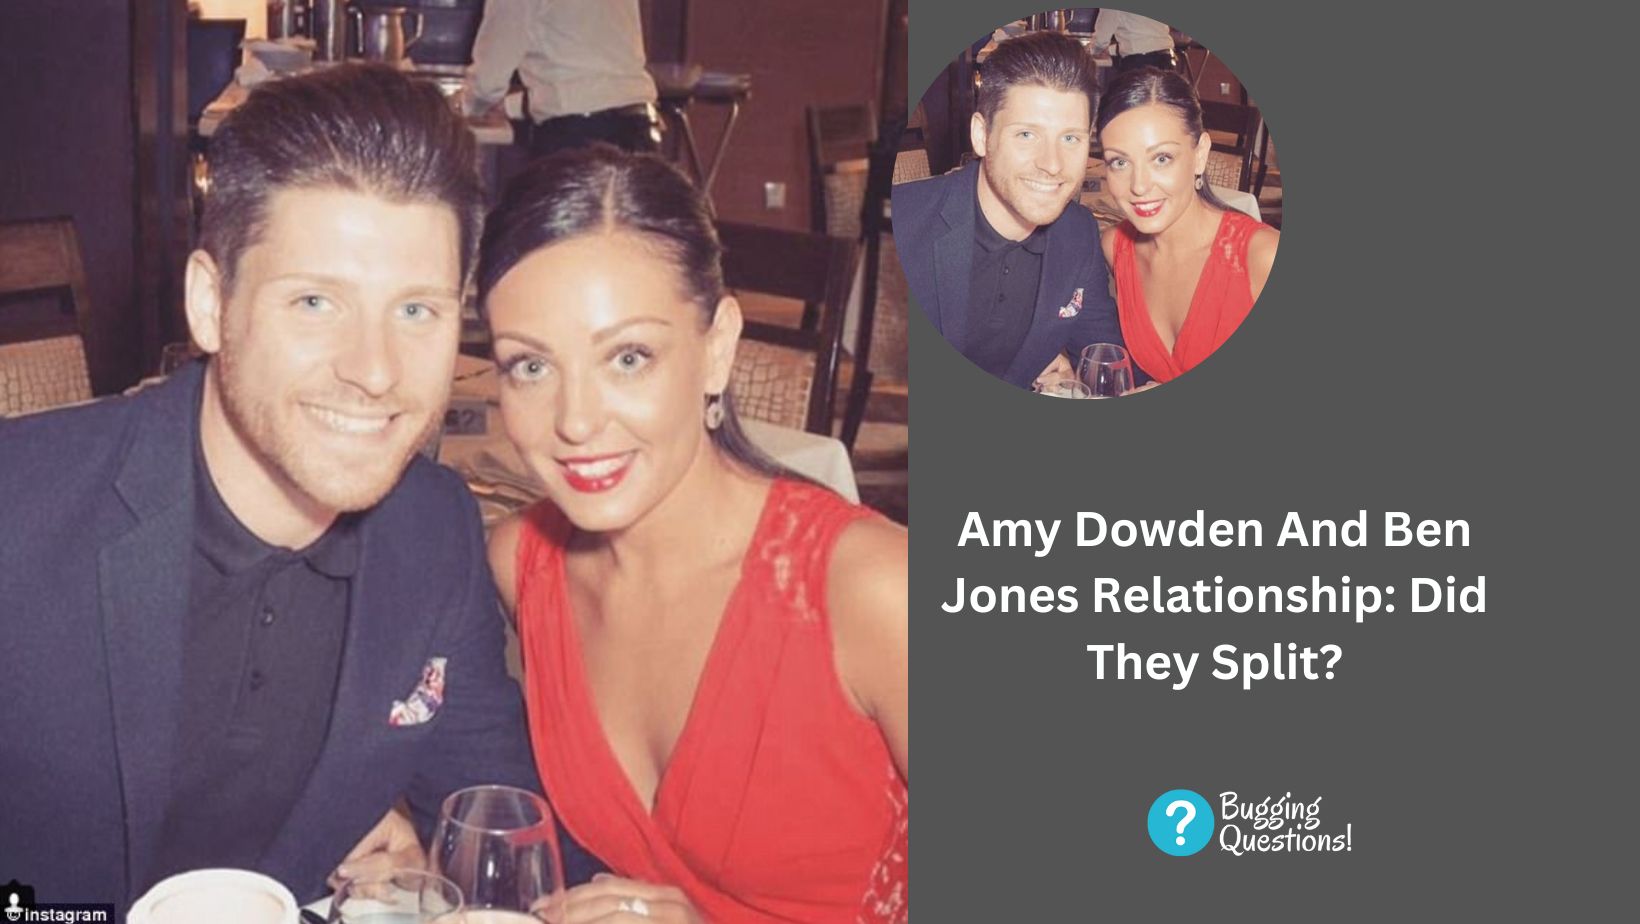 Amy Dowden And Ben Jones Relationship: Did They Split?